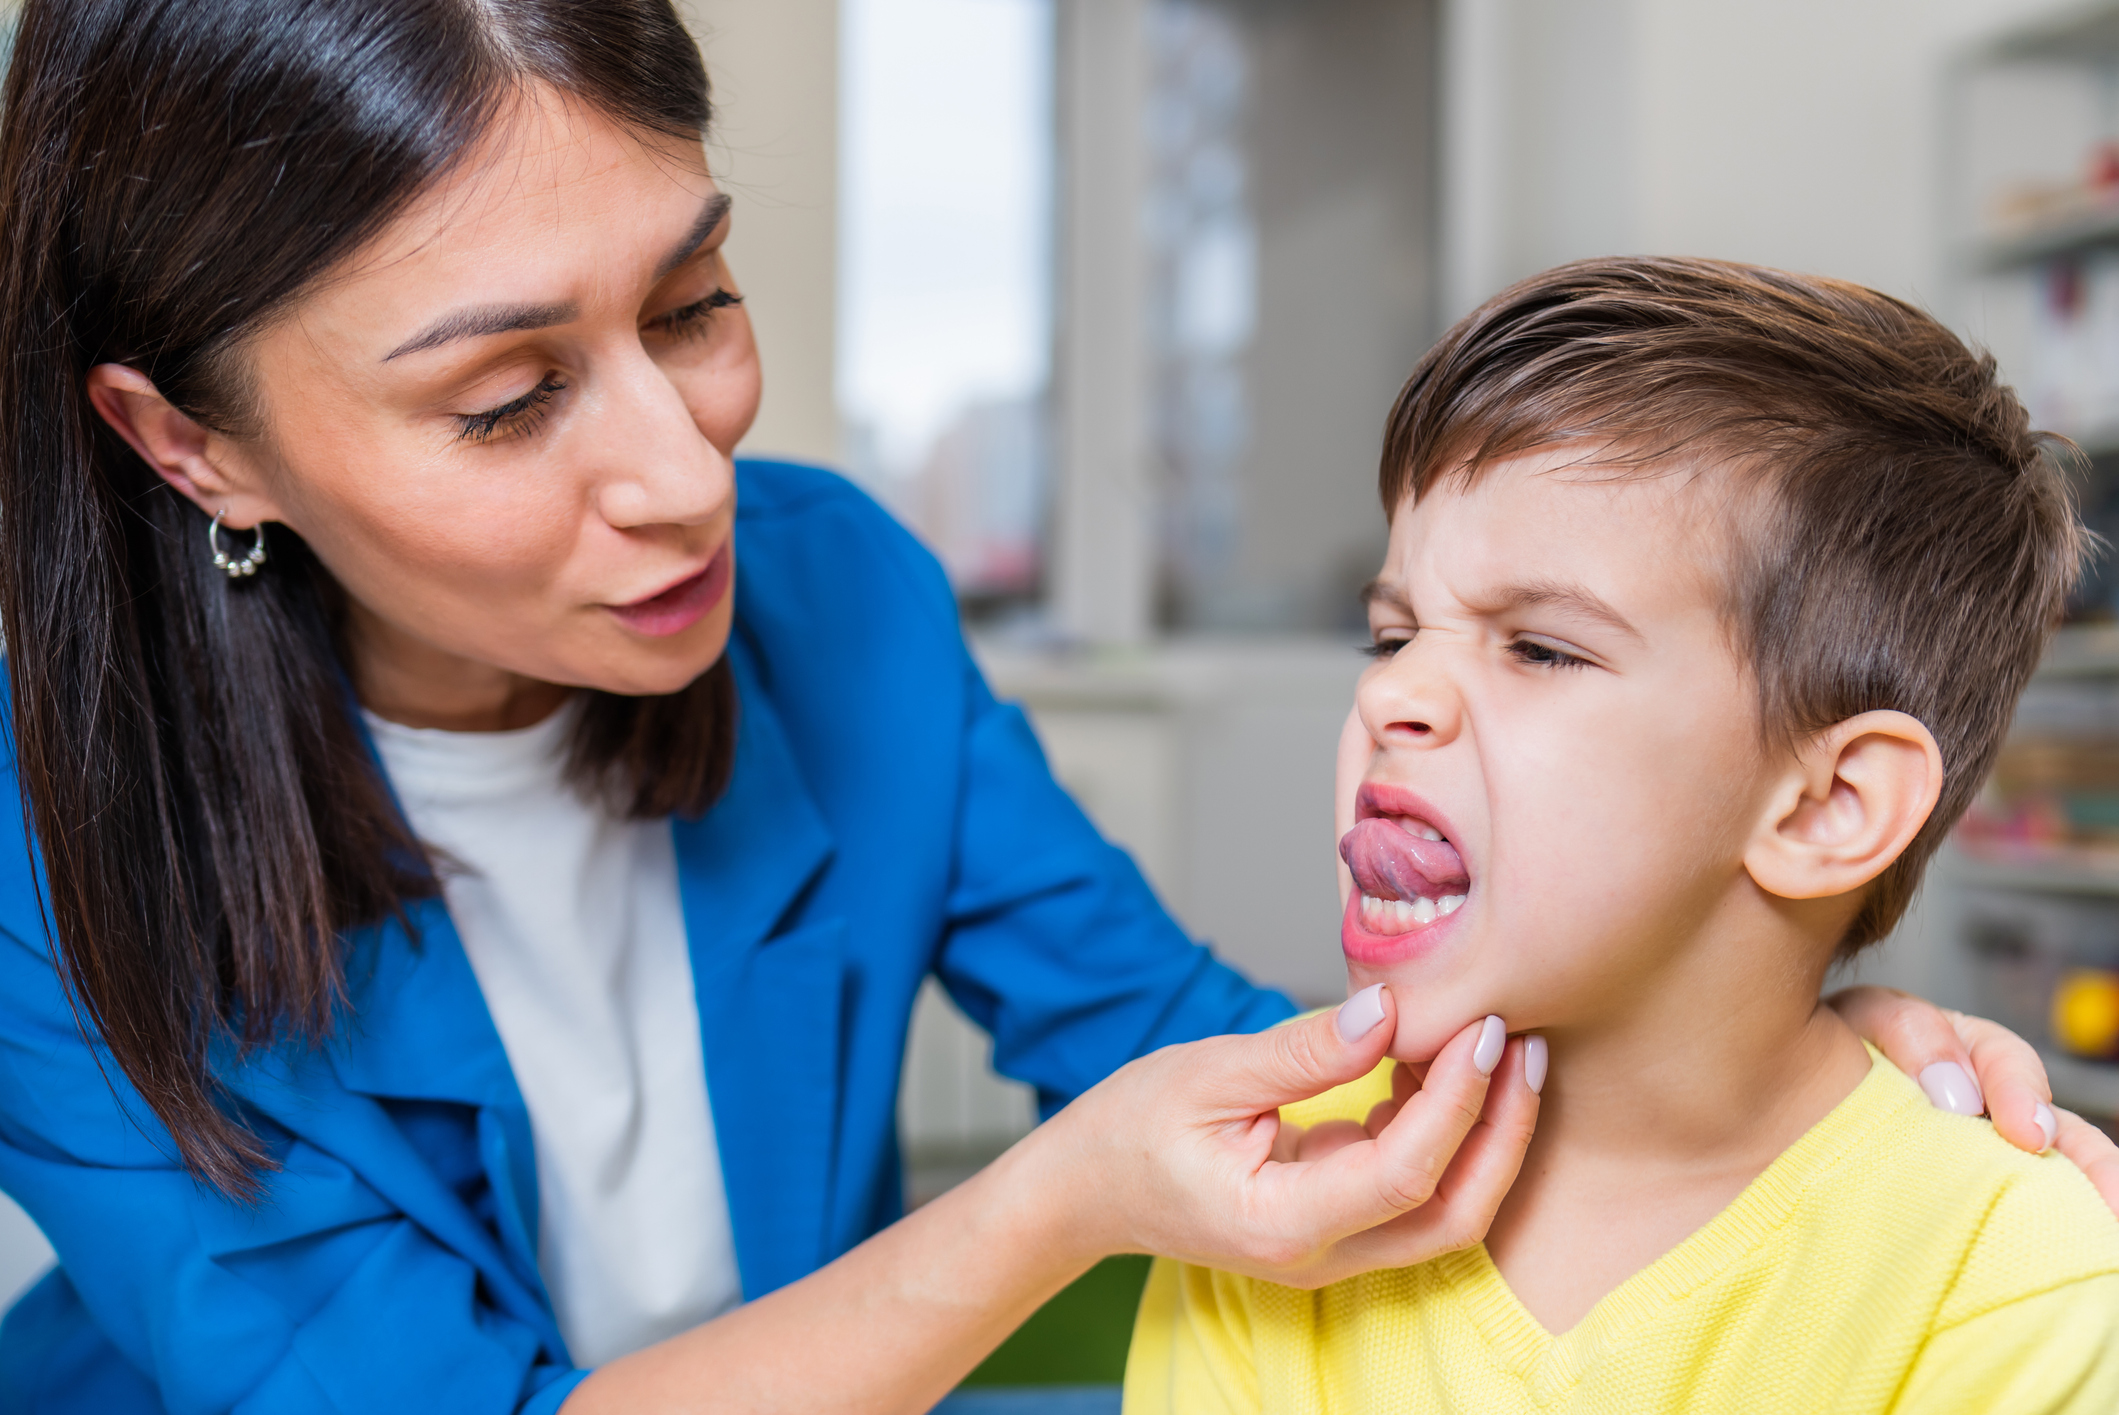 A speech language pathologist in a blue blazer holds a boy's chin to guide him through a muscle-strengthening exercise